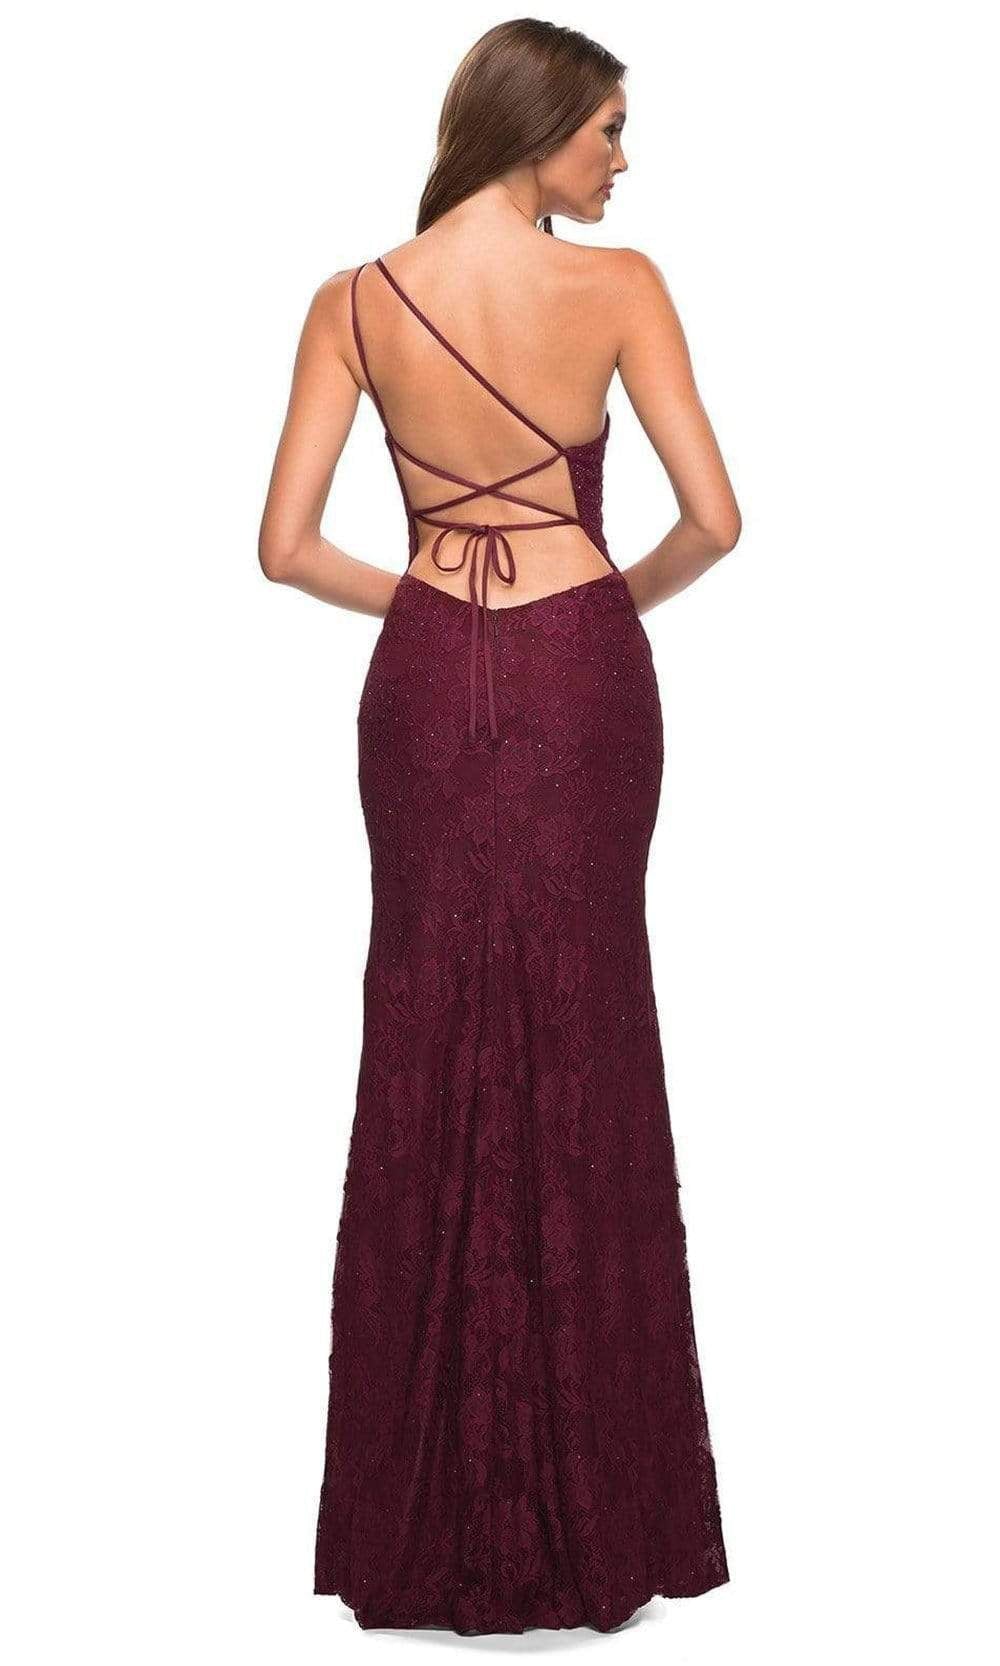 La Femme - 30441 Strappy Back Lace Gown Prom Dresses